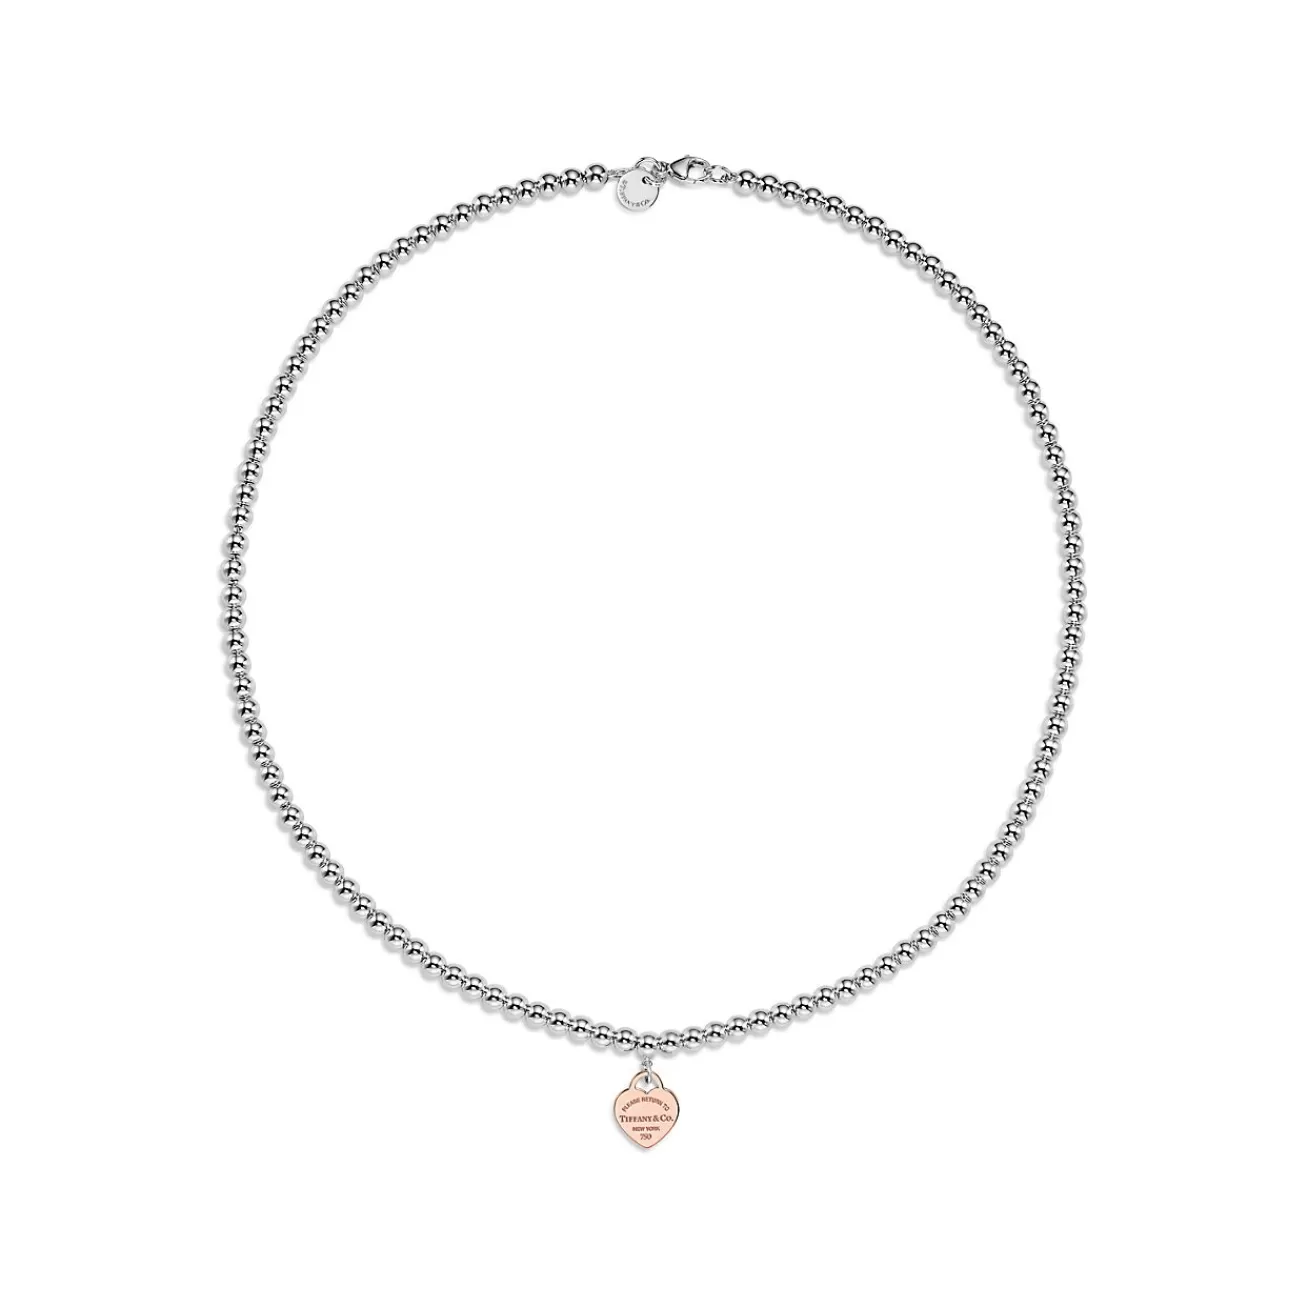 Tiffany & Co. Return to Tiffany® Heart Tag Bead Necklace in Sterling Silver & Rose Gold, Mini | ^ Necklaces & Pendants | New Jewelry